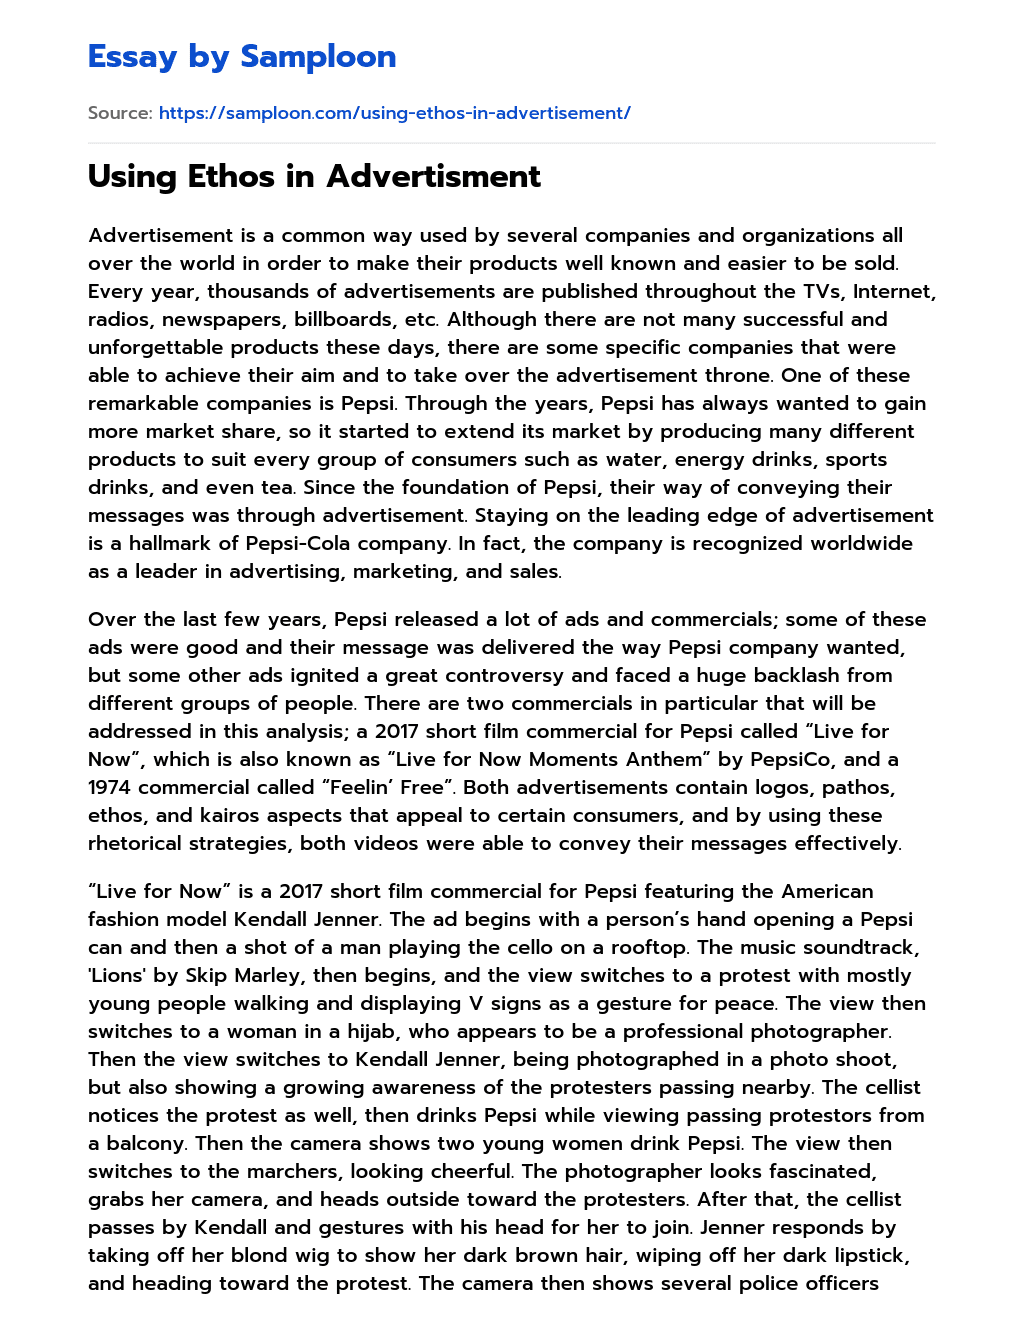 Using Ethos in Advertisment essay